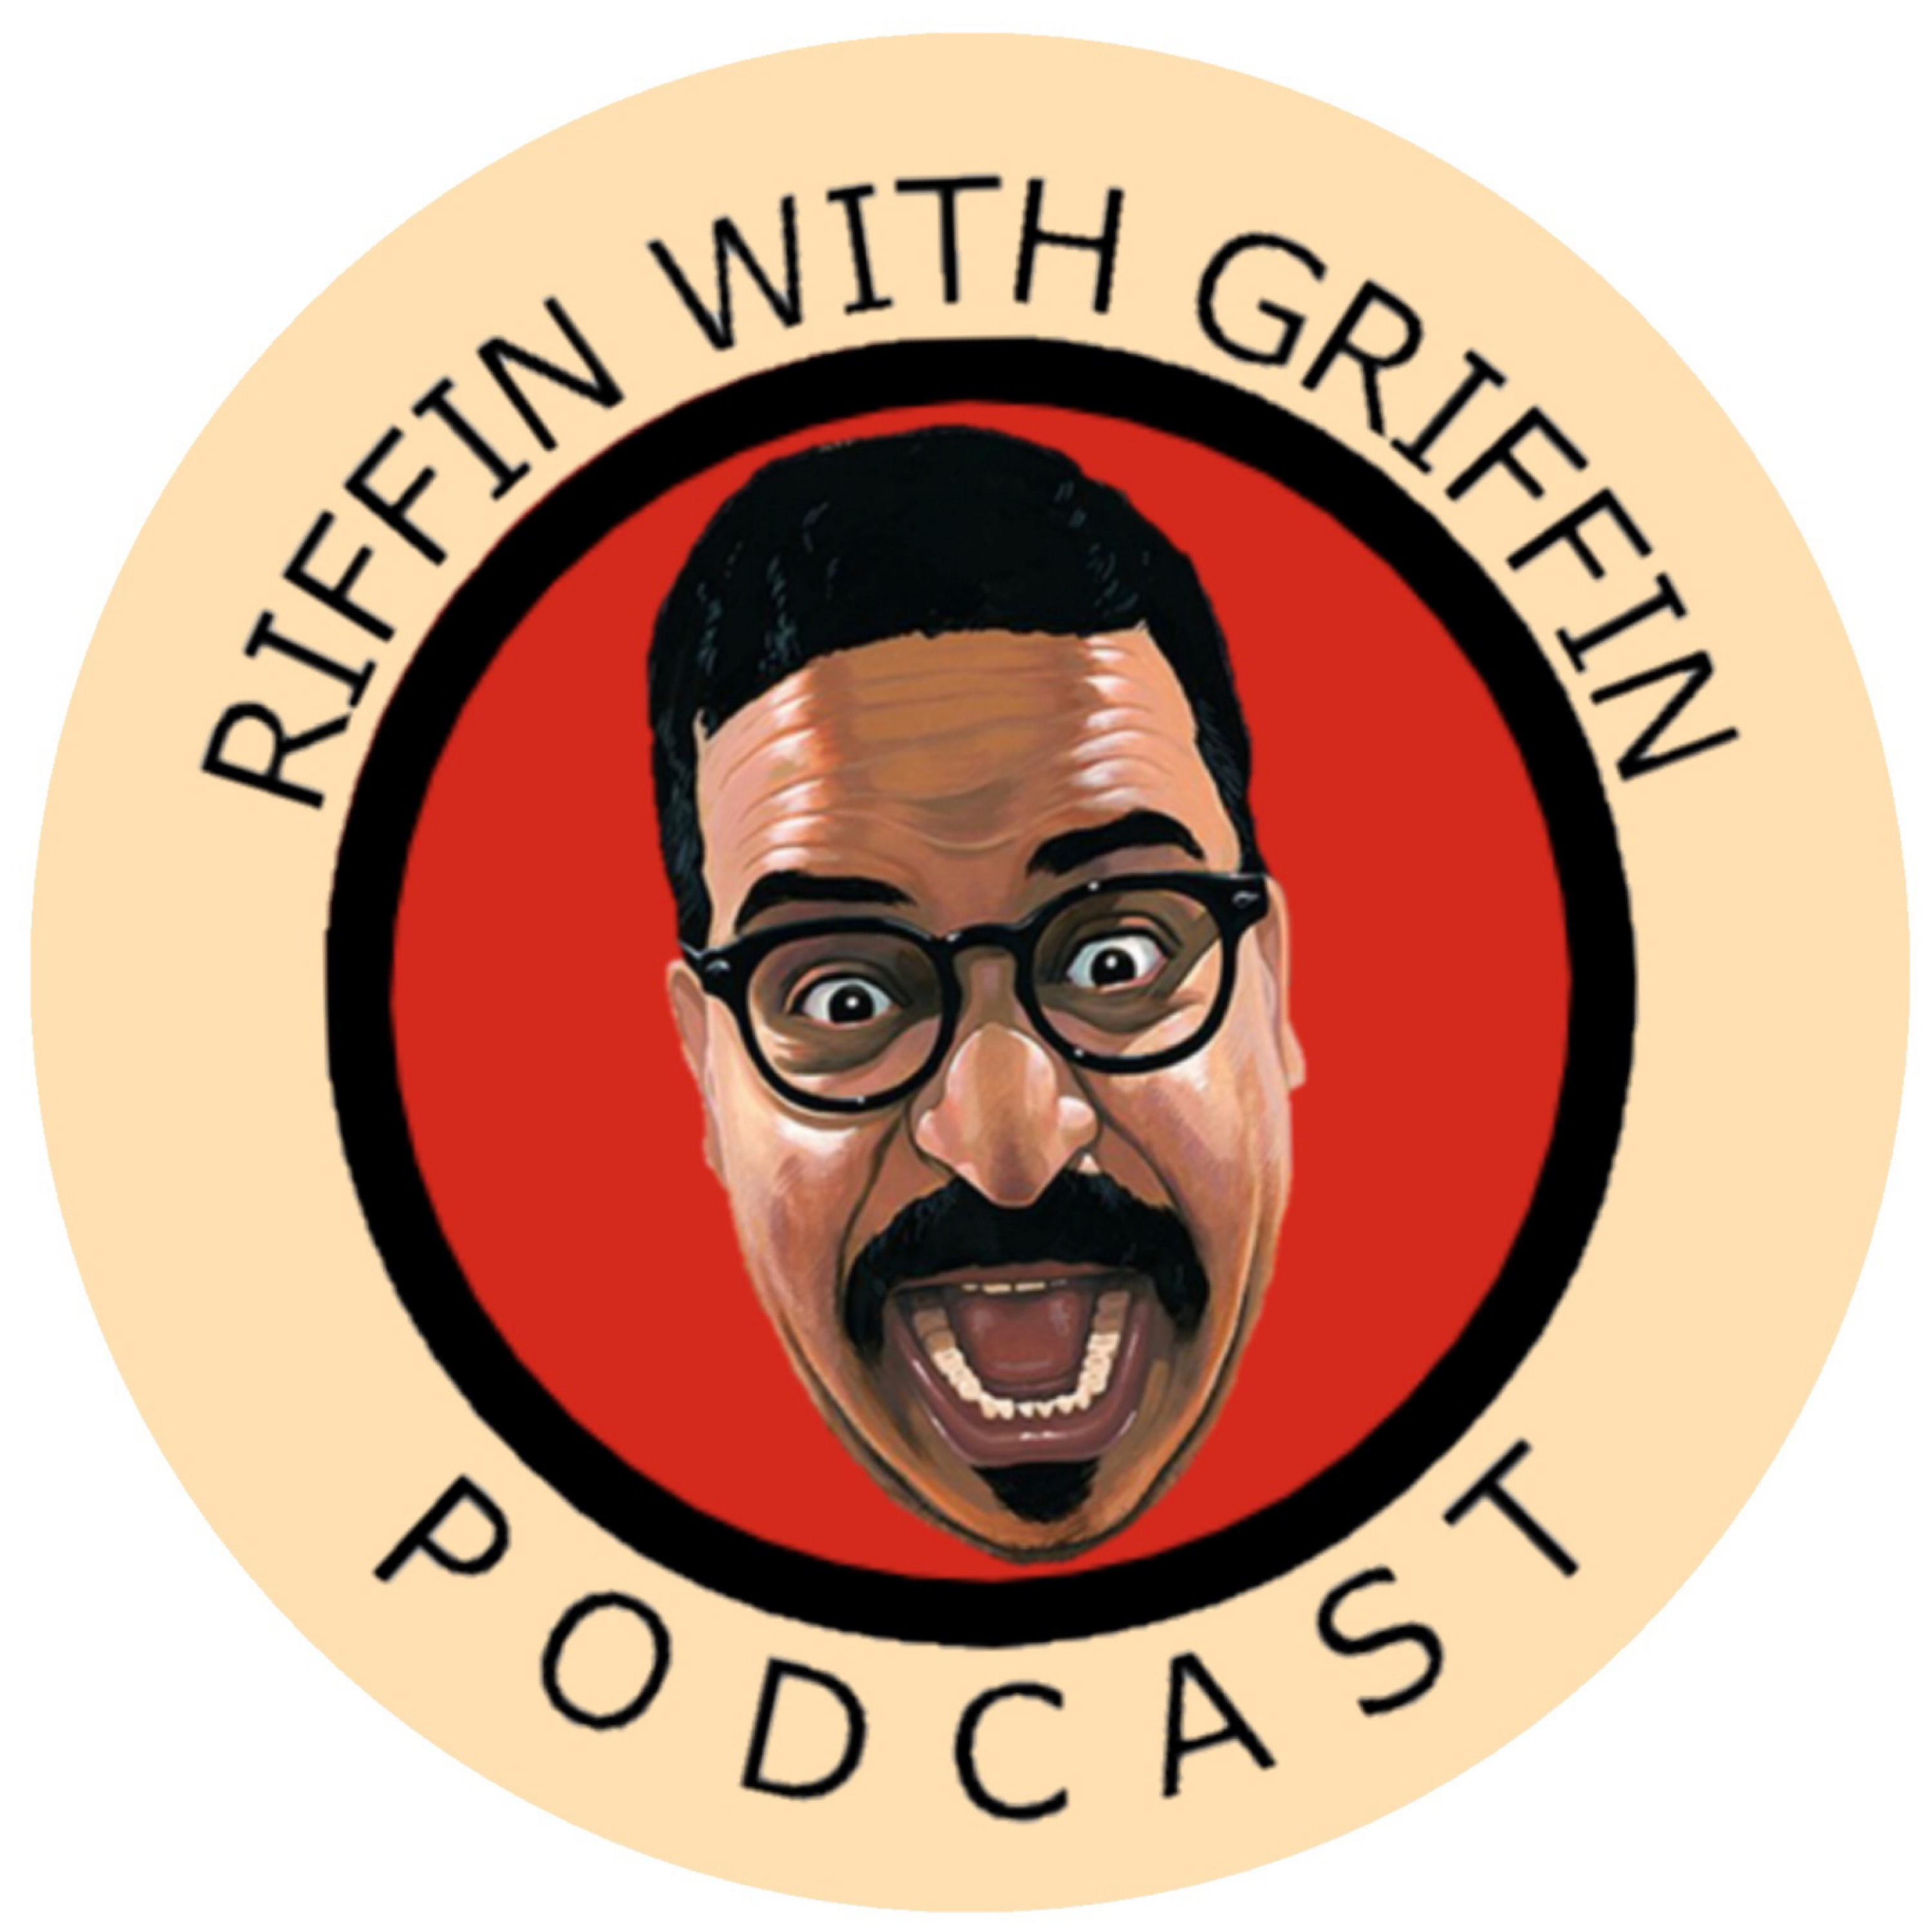 Mean Girls, Marvels, Oscars: Riffin With Griffin EP271